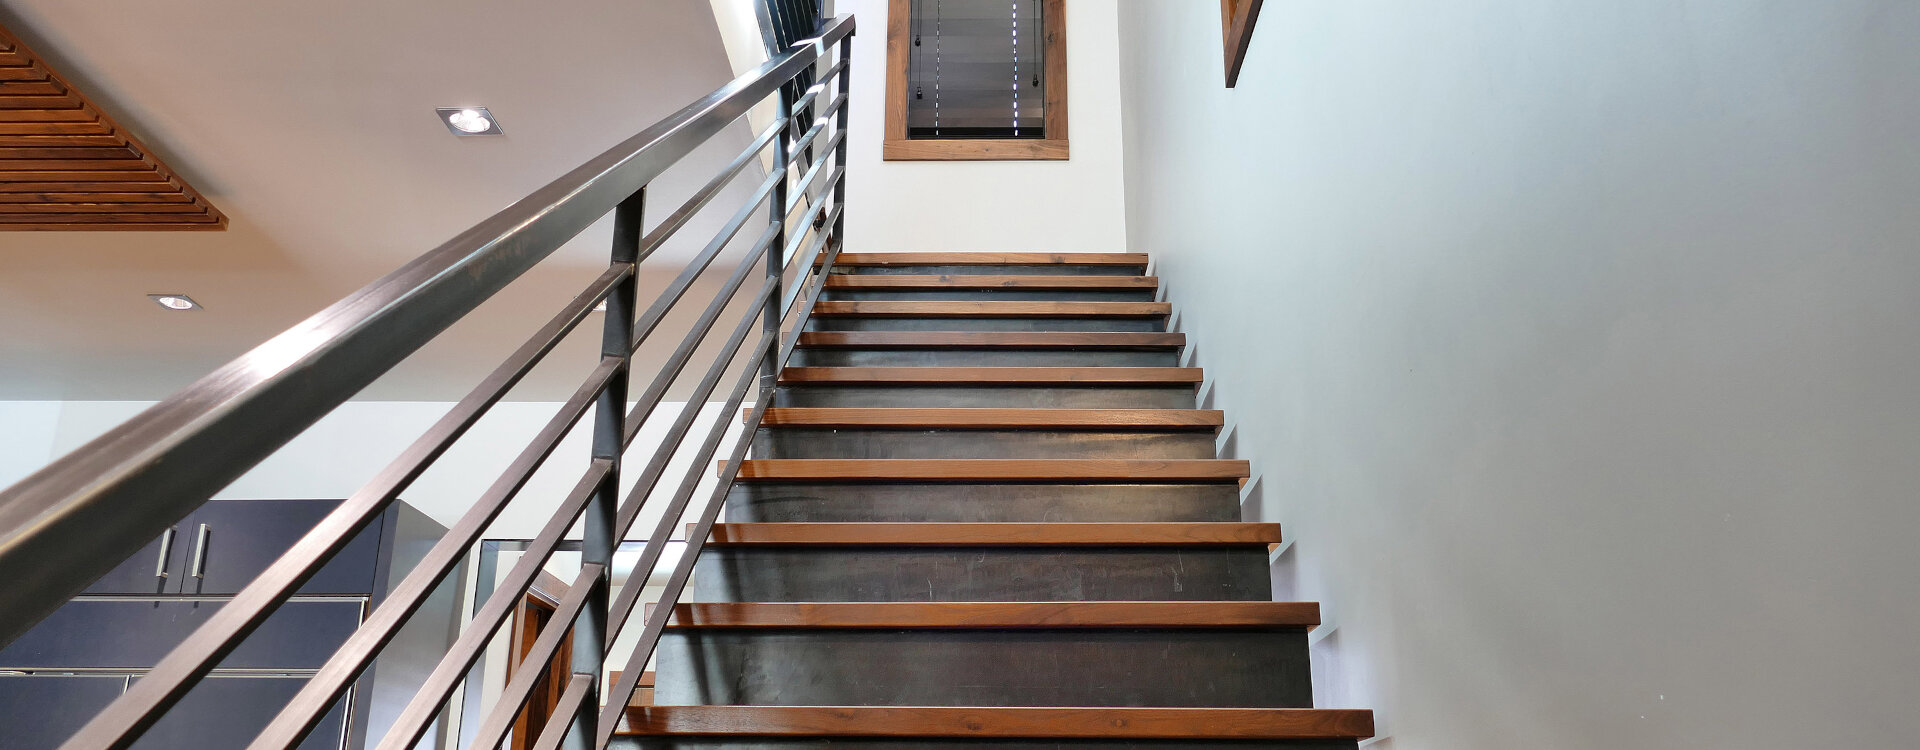 6.01-telluride-parkside-retreat-stairs-to-upper-level